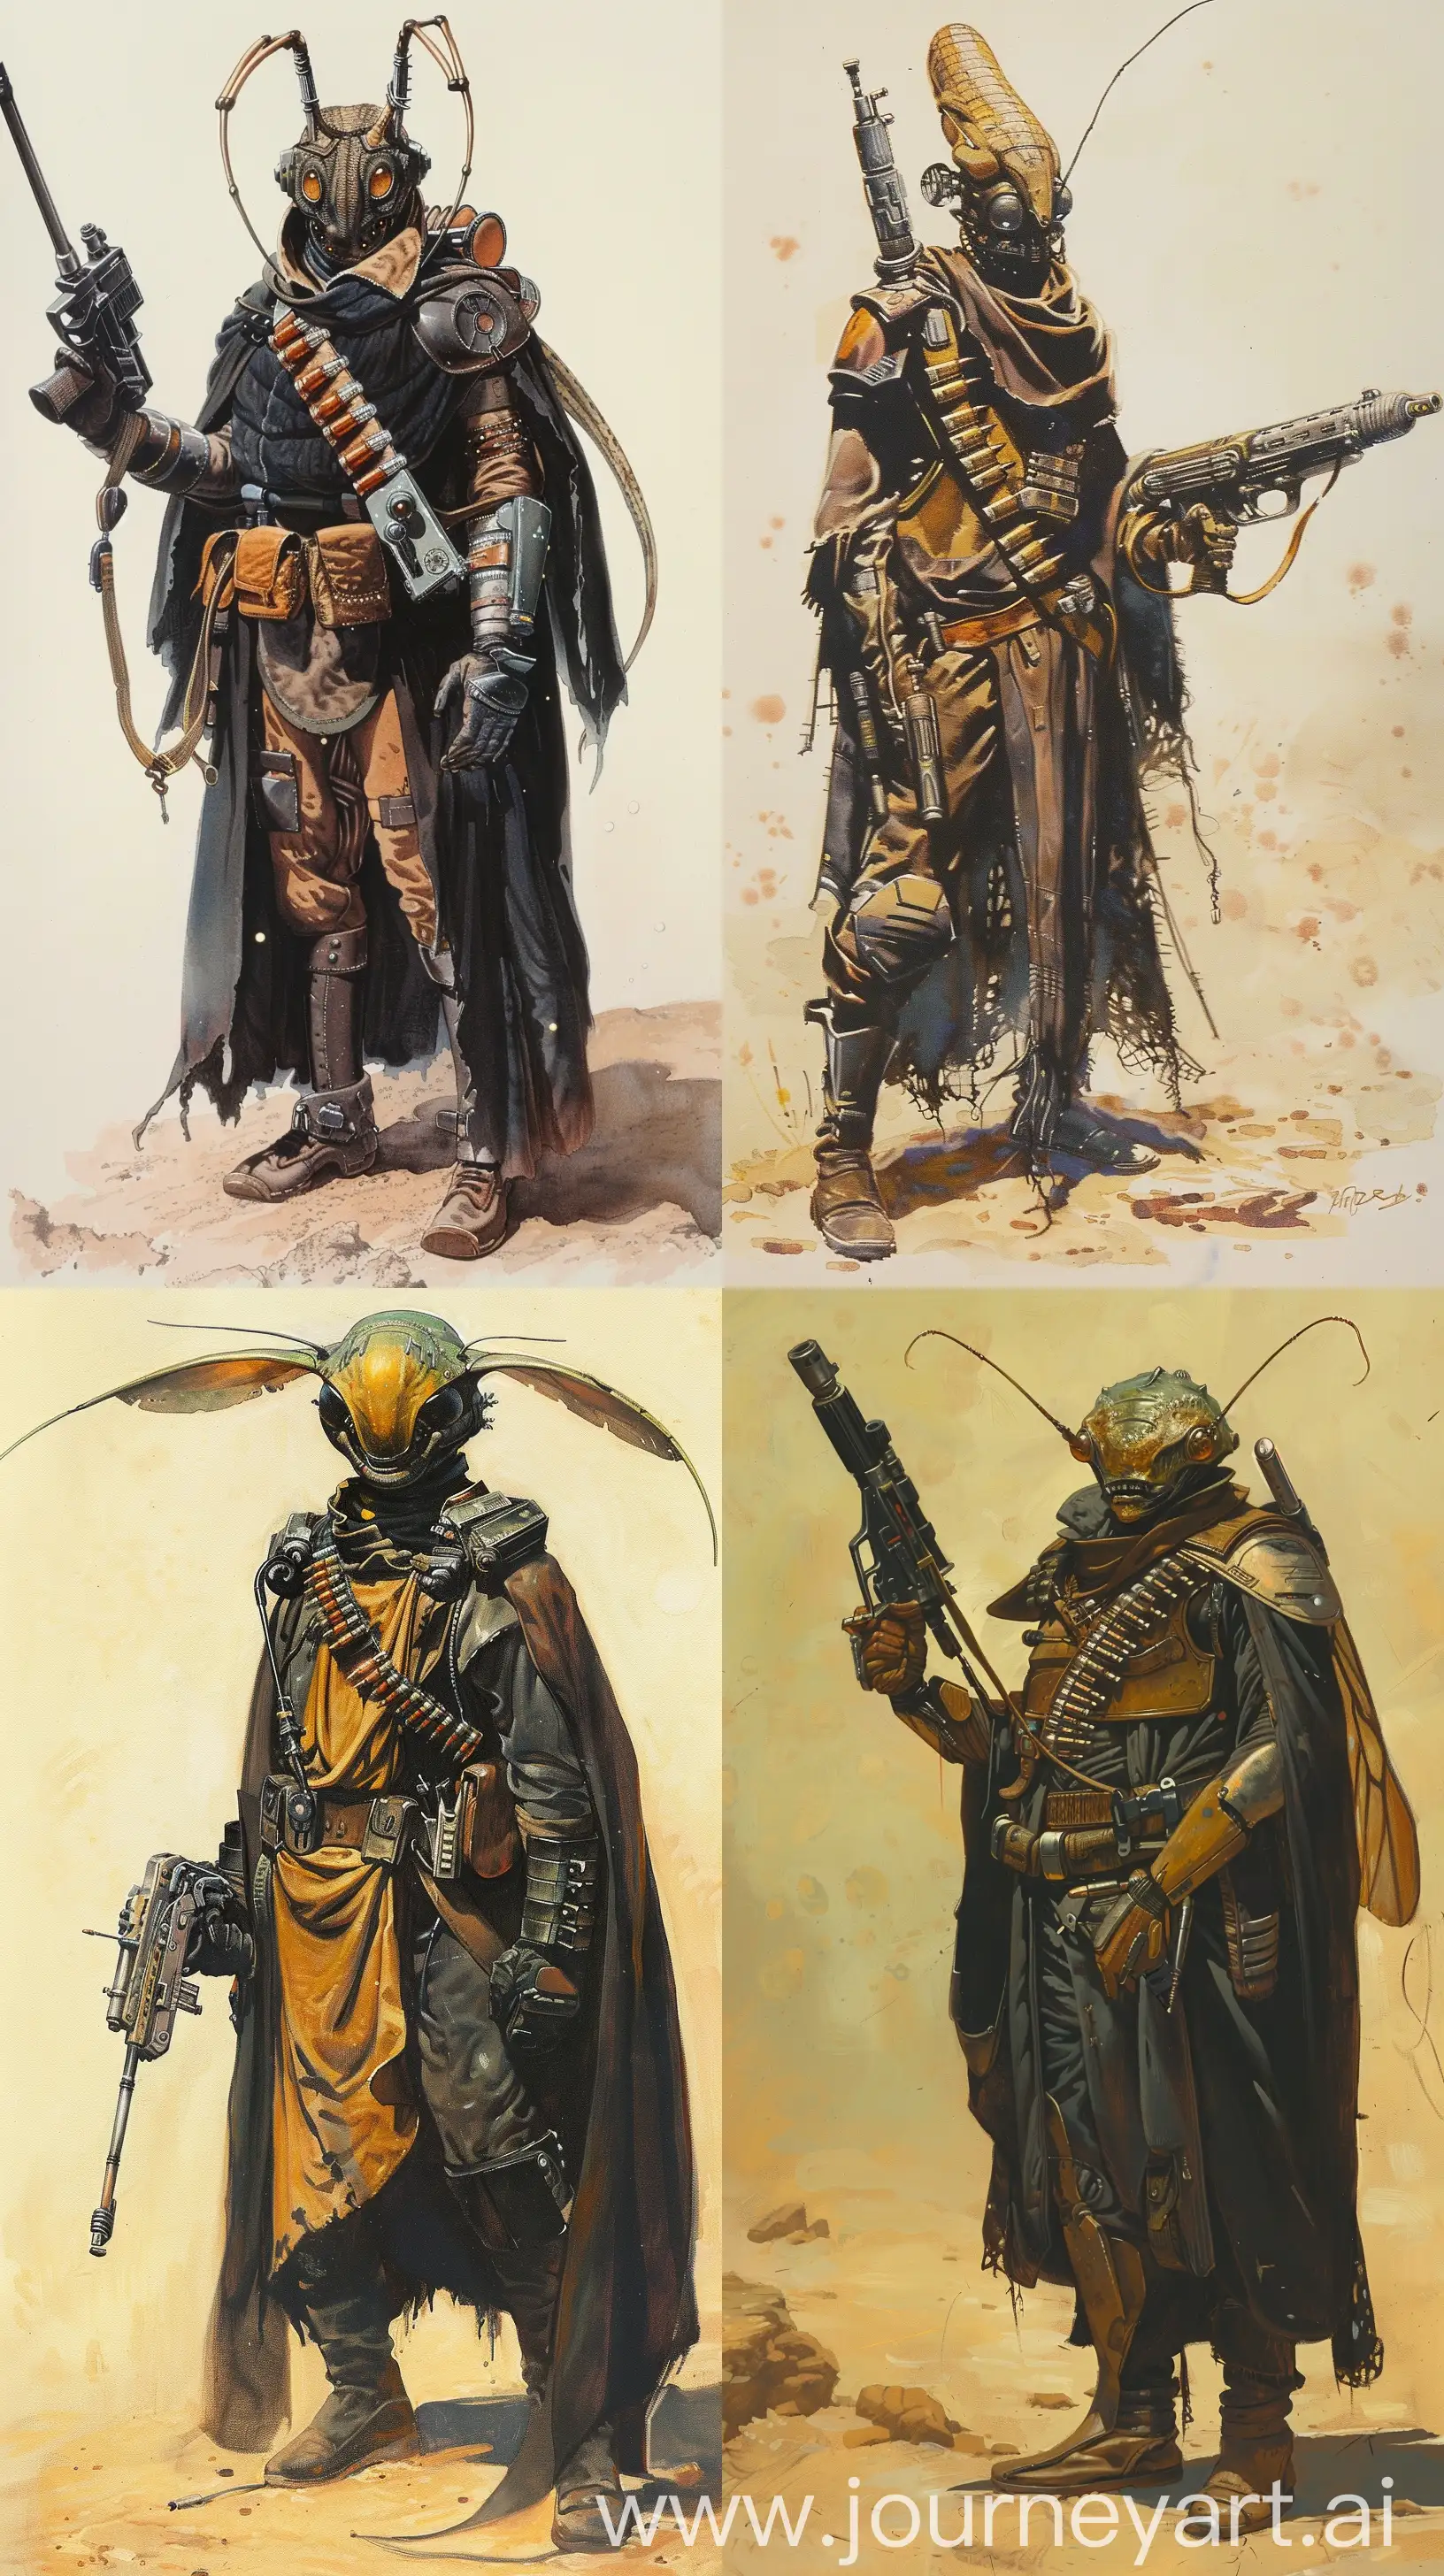 Old Concept art of an insectoid alien bounty hunter wearing bandolier, in dark robes, with some armor, holding futuristic gun painted by Ralph McQuarrie. In retro science fiction art style. In color. --ar 9:16